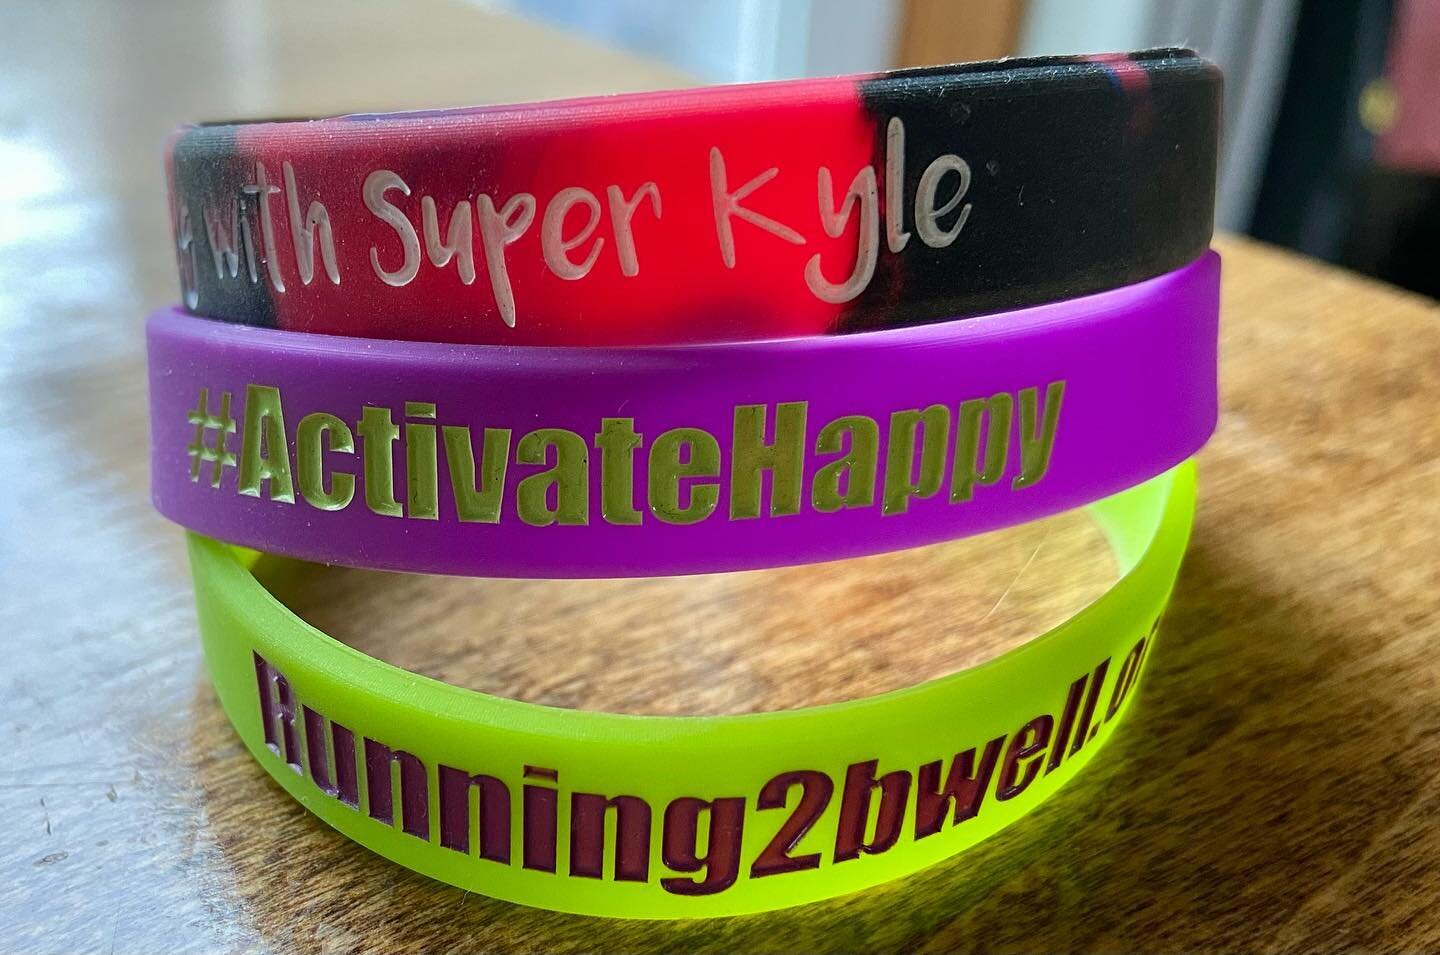 Thank you @harasxlacidar for the cool wrist band. Wearing it proud!
Looking forward to more adventures with you and Super Kyle.

#teamrunning2bwell #ActivateHealing
#Running2bwell #ActivateHappy #exerciseismedicine #ADMBoard #Exchange #turkeyburner5k